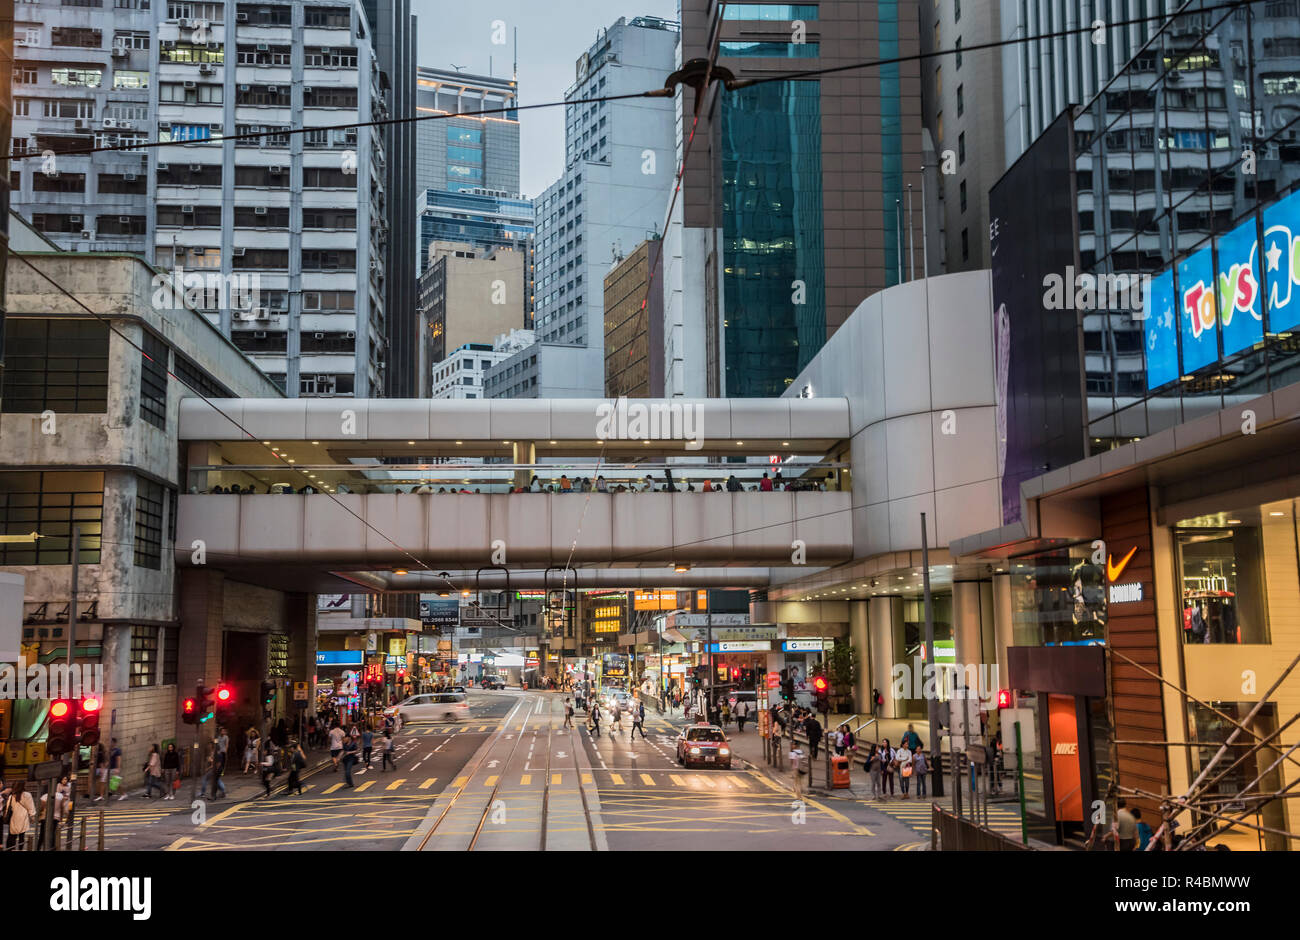 A busy scene showing the offices and local transport on the Causeway Bay district of Hong Kong China. Stock Photo